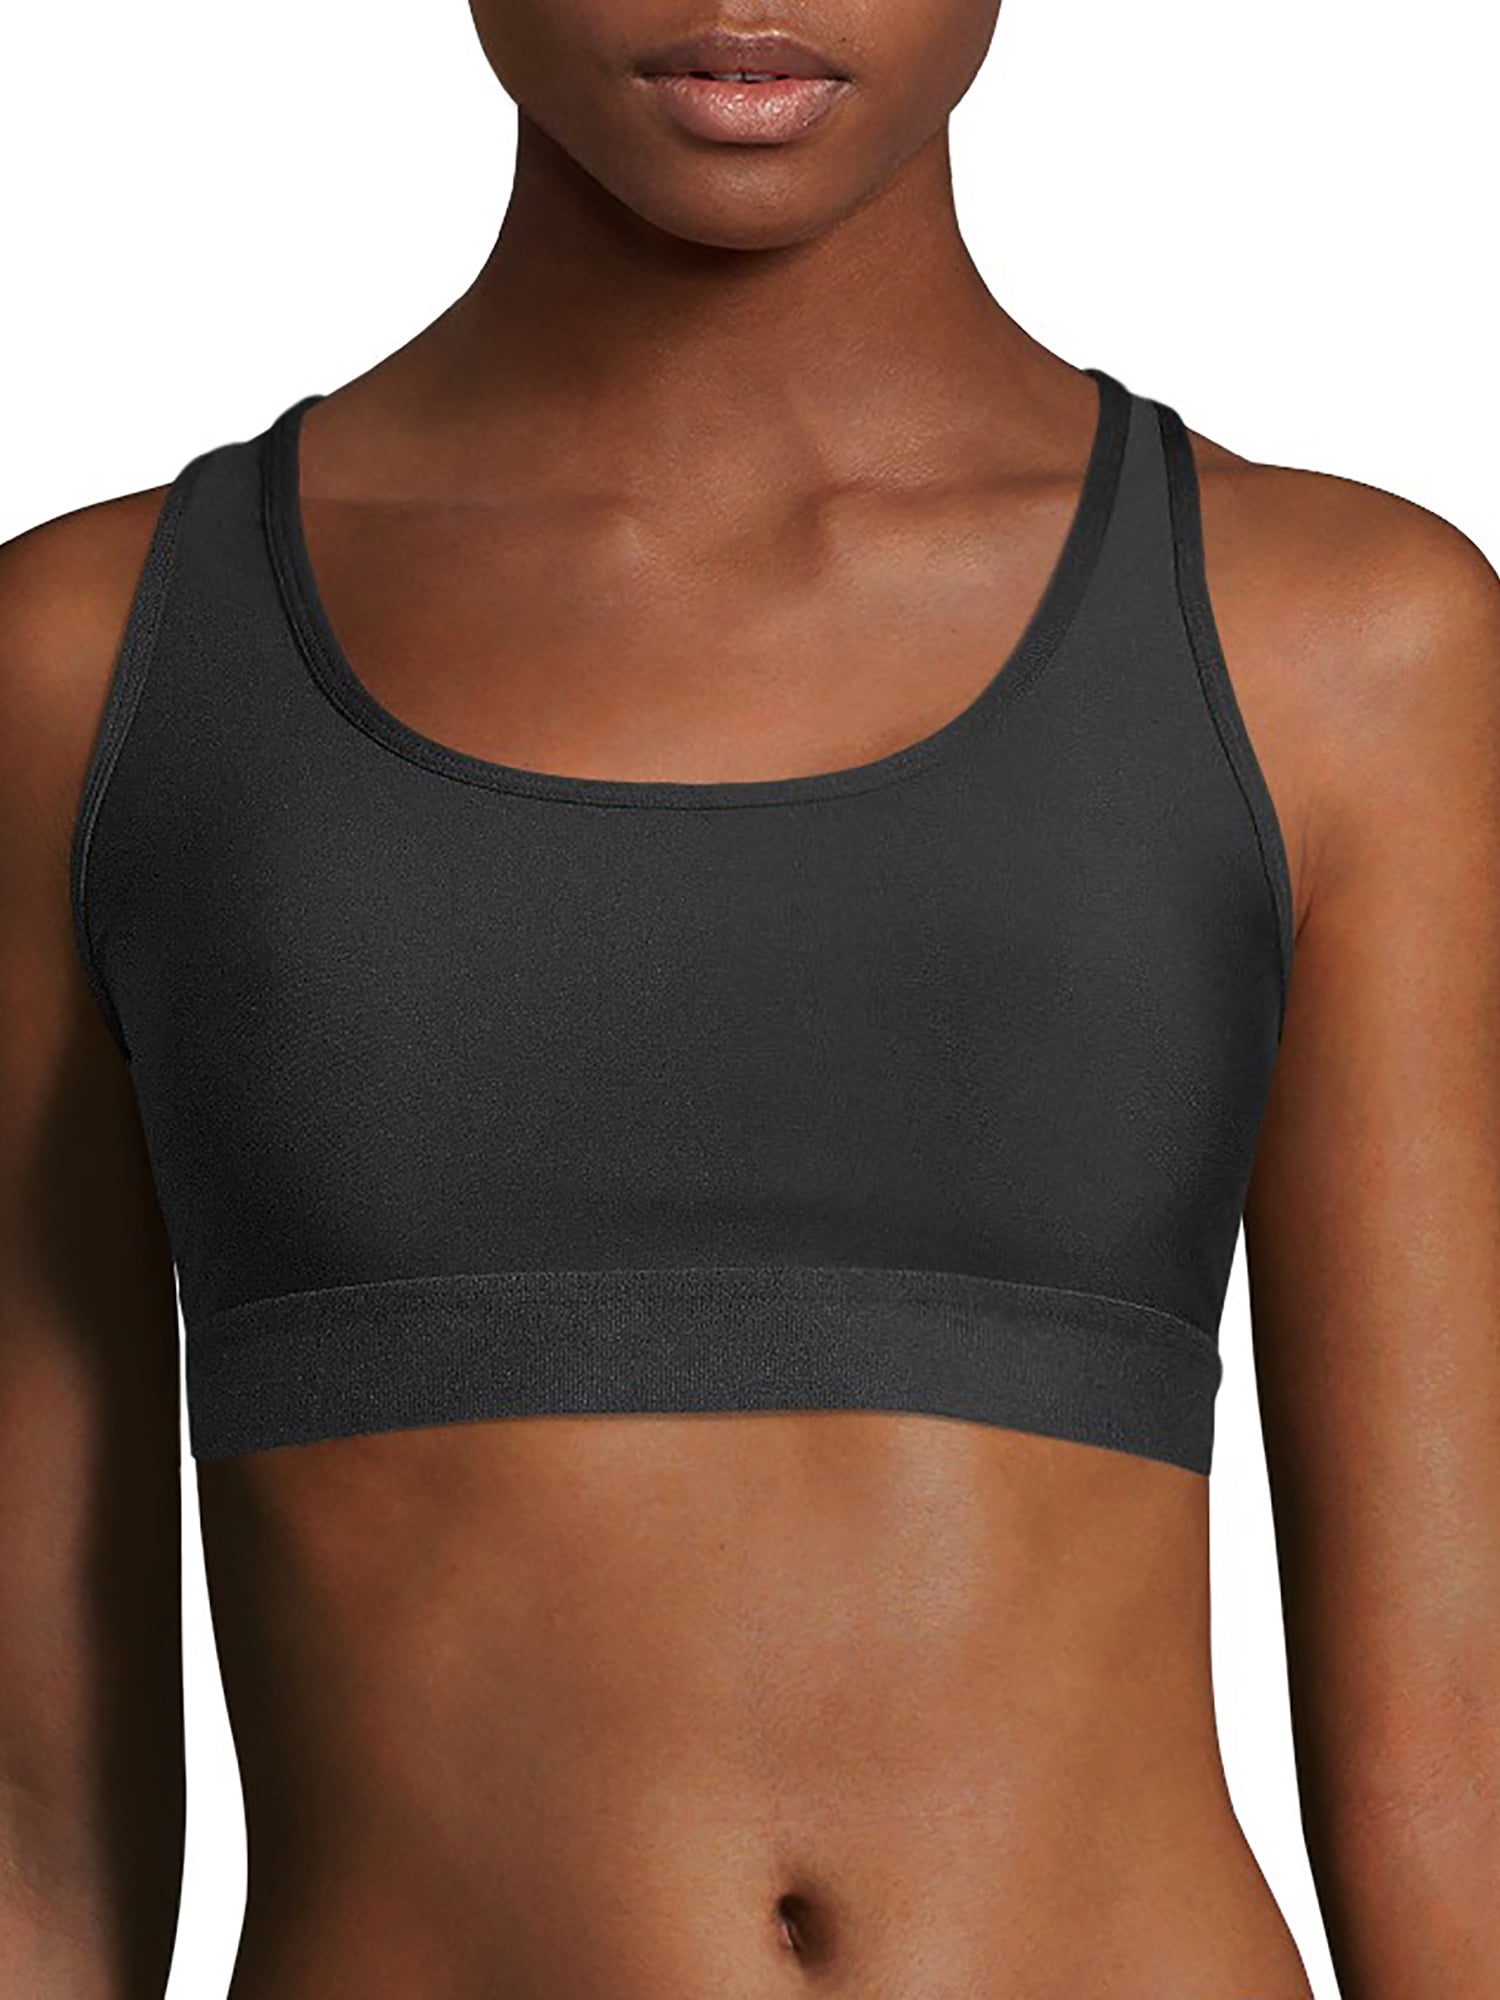 Hanes The Absolute Workout Sports Bra in Valsad - Dealers, Manufacturers &  Suppliers - Justdial